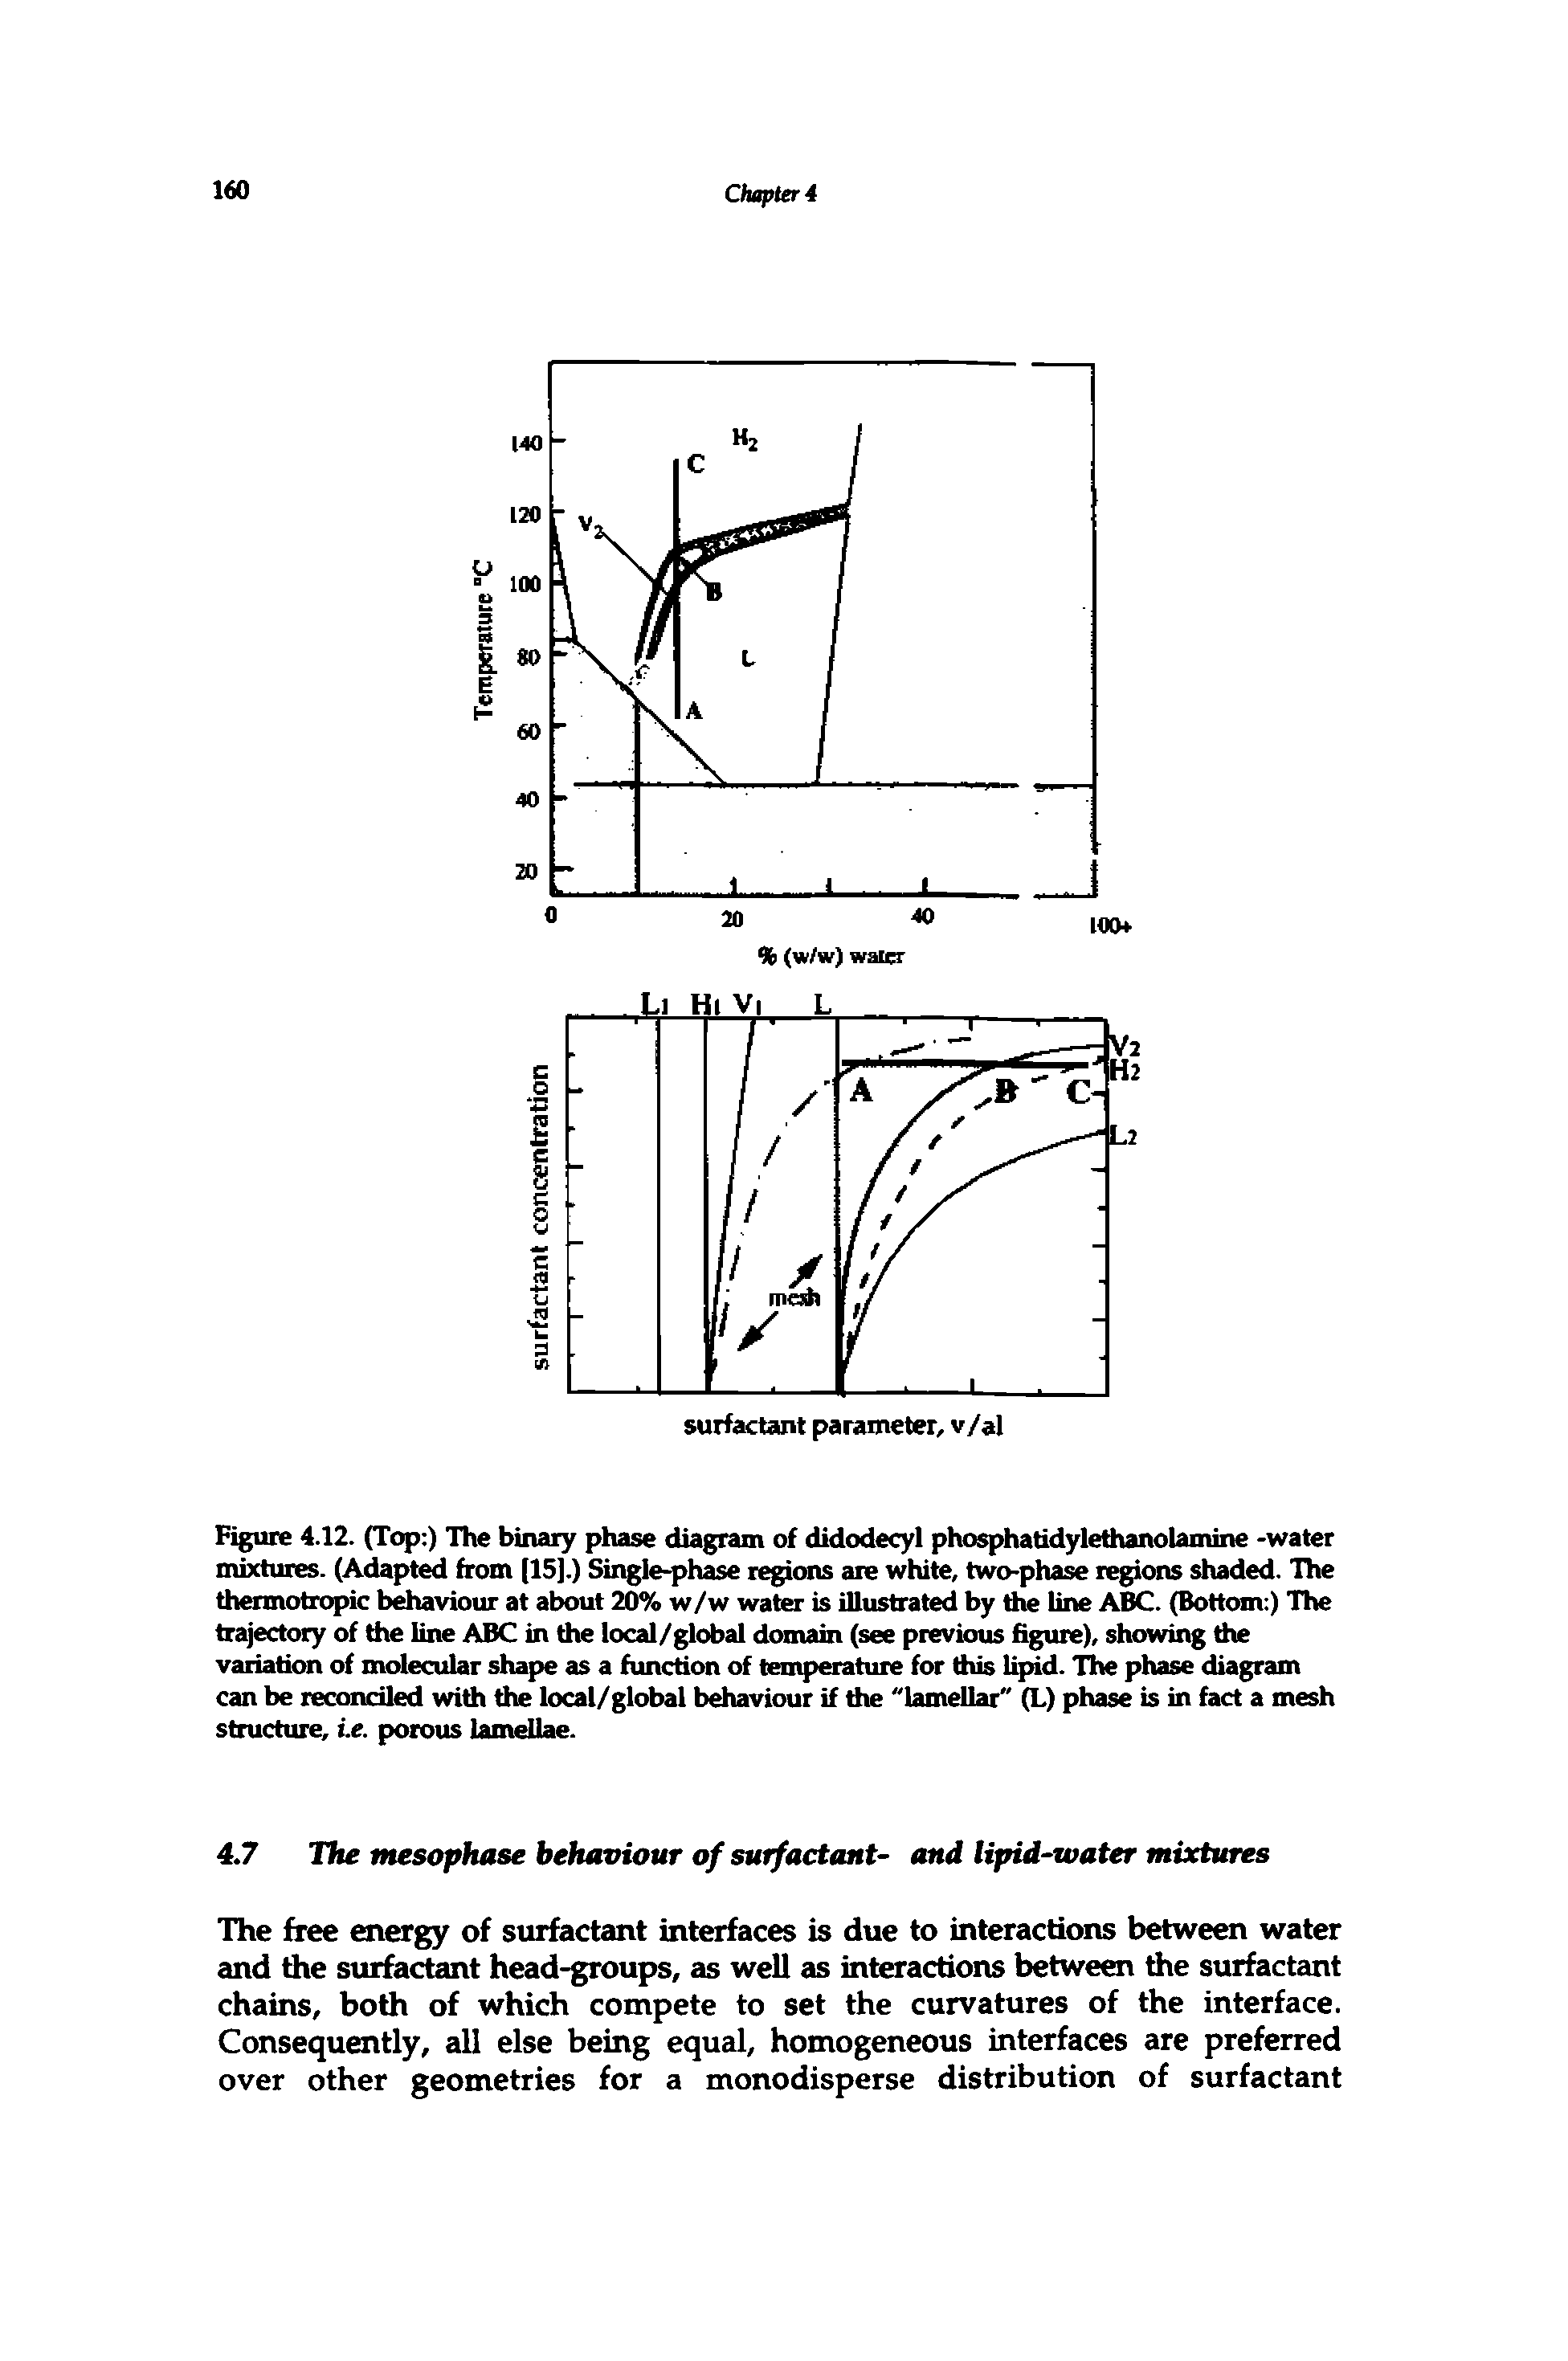 Figure 4.12. (Top ) The binary phase diagram of didodecyl phosphatidylethanolamine -water mixtures. (Adapted from [15].) Single-phase regions are white, two-pha% regions shaded. The thermotropic behaviour at about 20% w/w water is illustrated by die line ABC. (Bottom ) The trajectory of the line ABC in the local/global domain (see previous figure), showing the variation of molecular shape as a function of temperature for this l d. The phase diagram can be reconciled with the local/global behaviour if the "lamellar" (L) phase is in fact a mesh structure, i.e. porous lamellae.